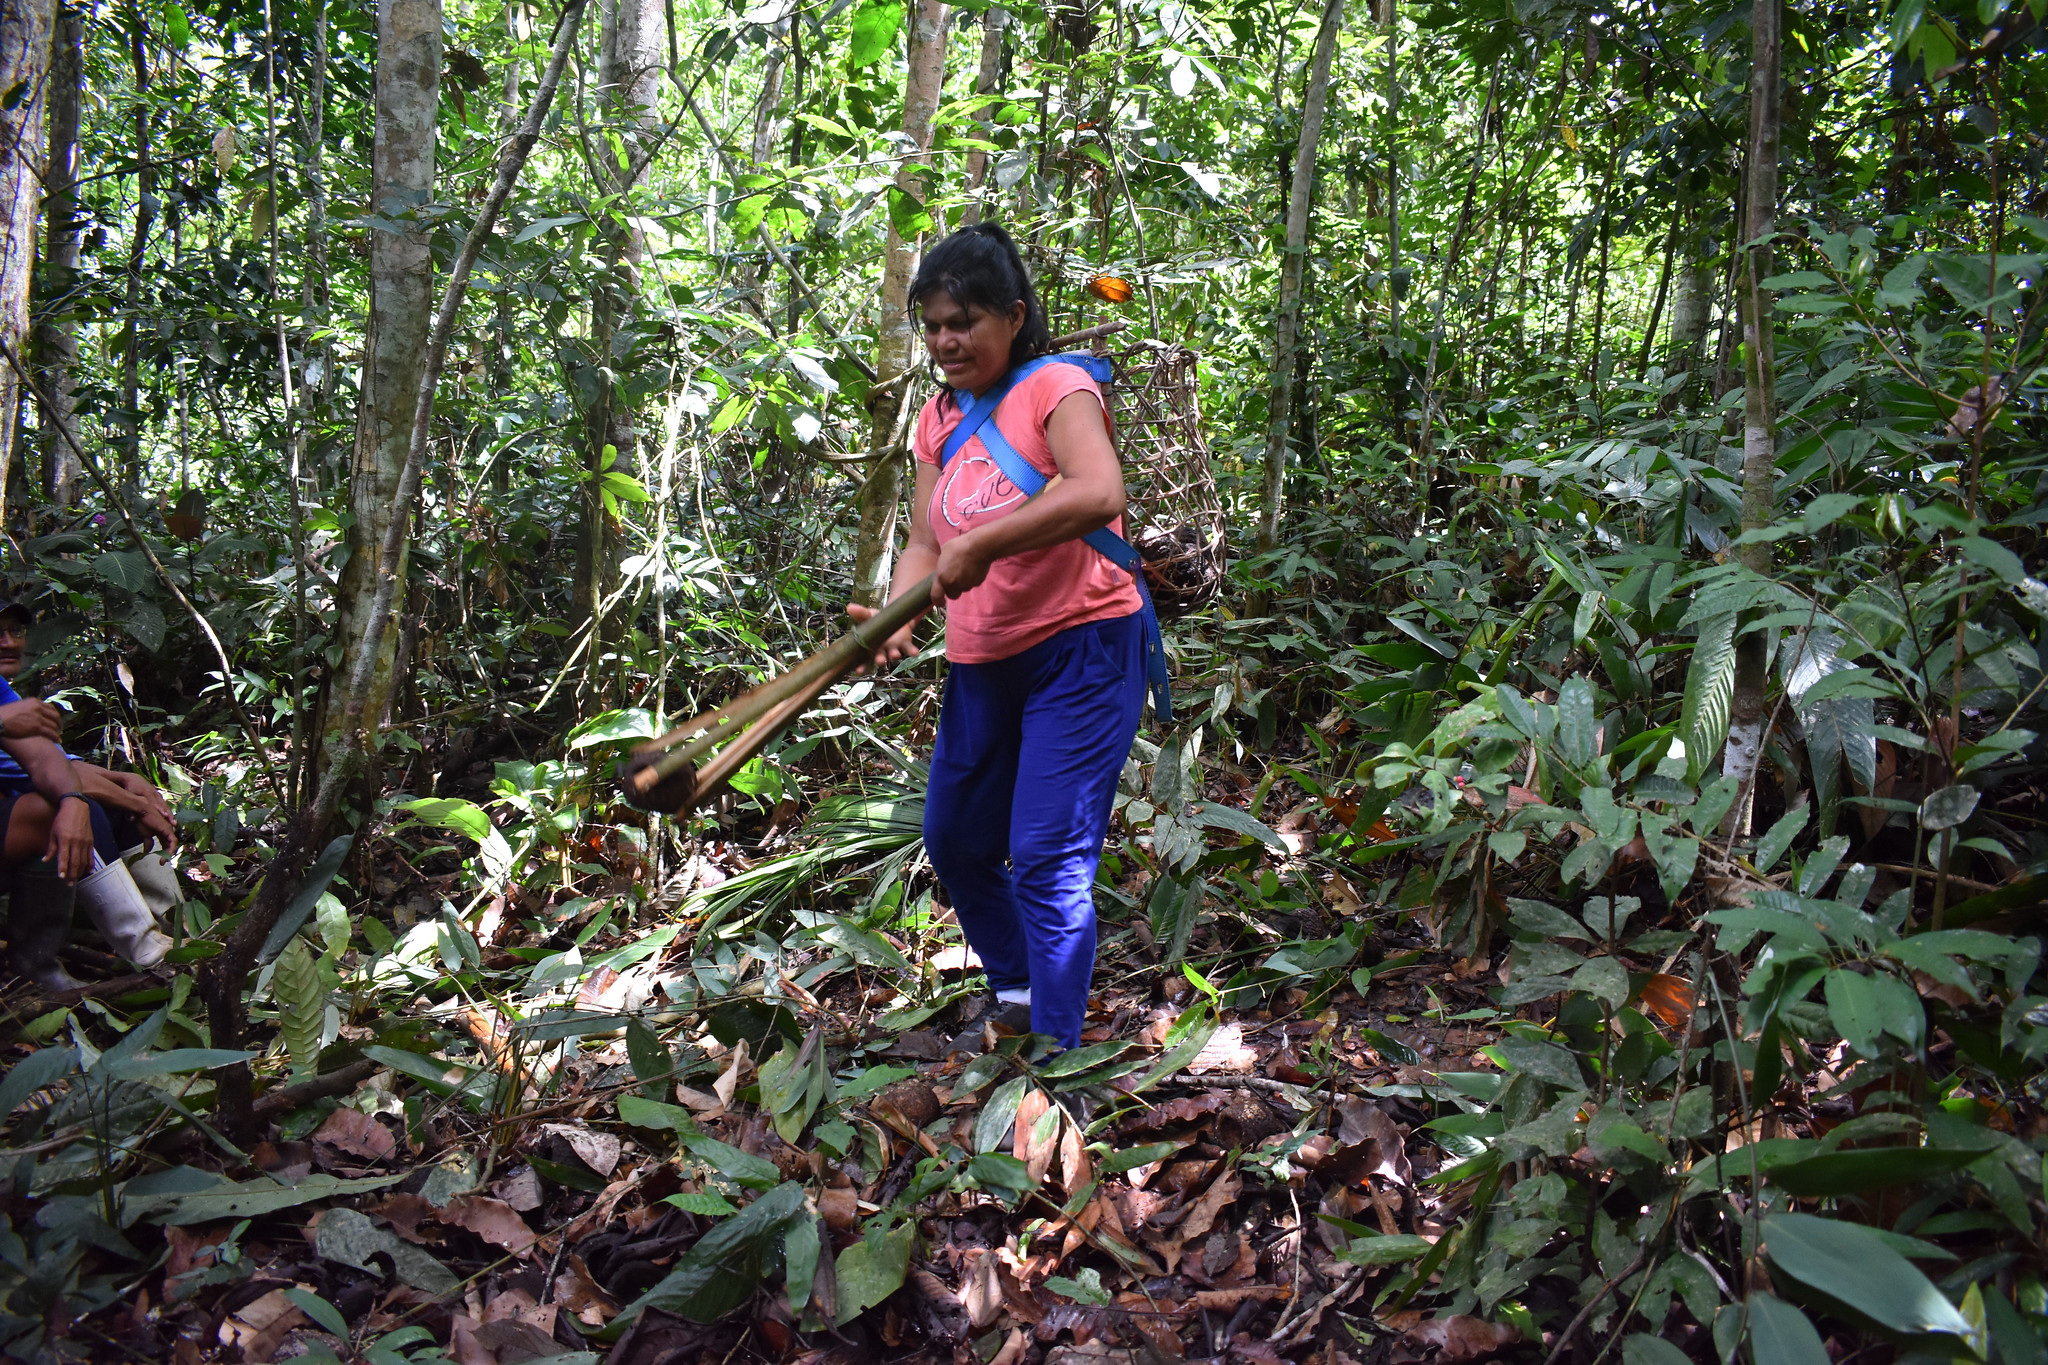 Indigenous communities helping sustainably manage and patrol rainforest threatened by gold mining and illegal logging